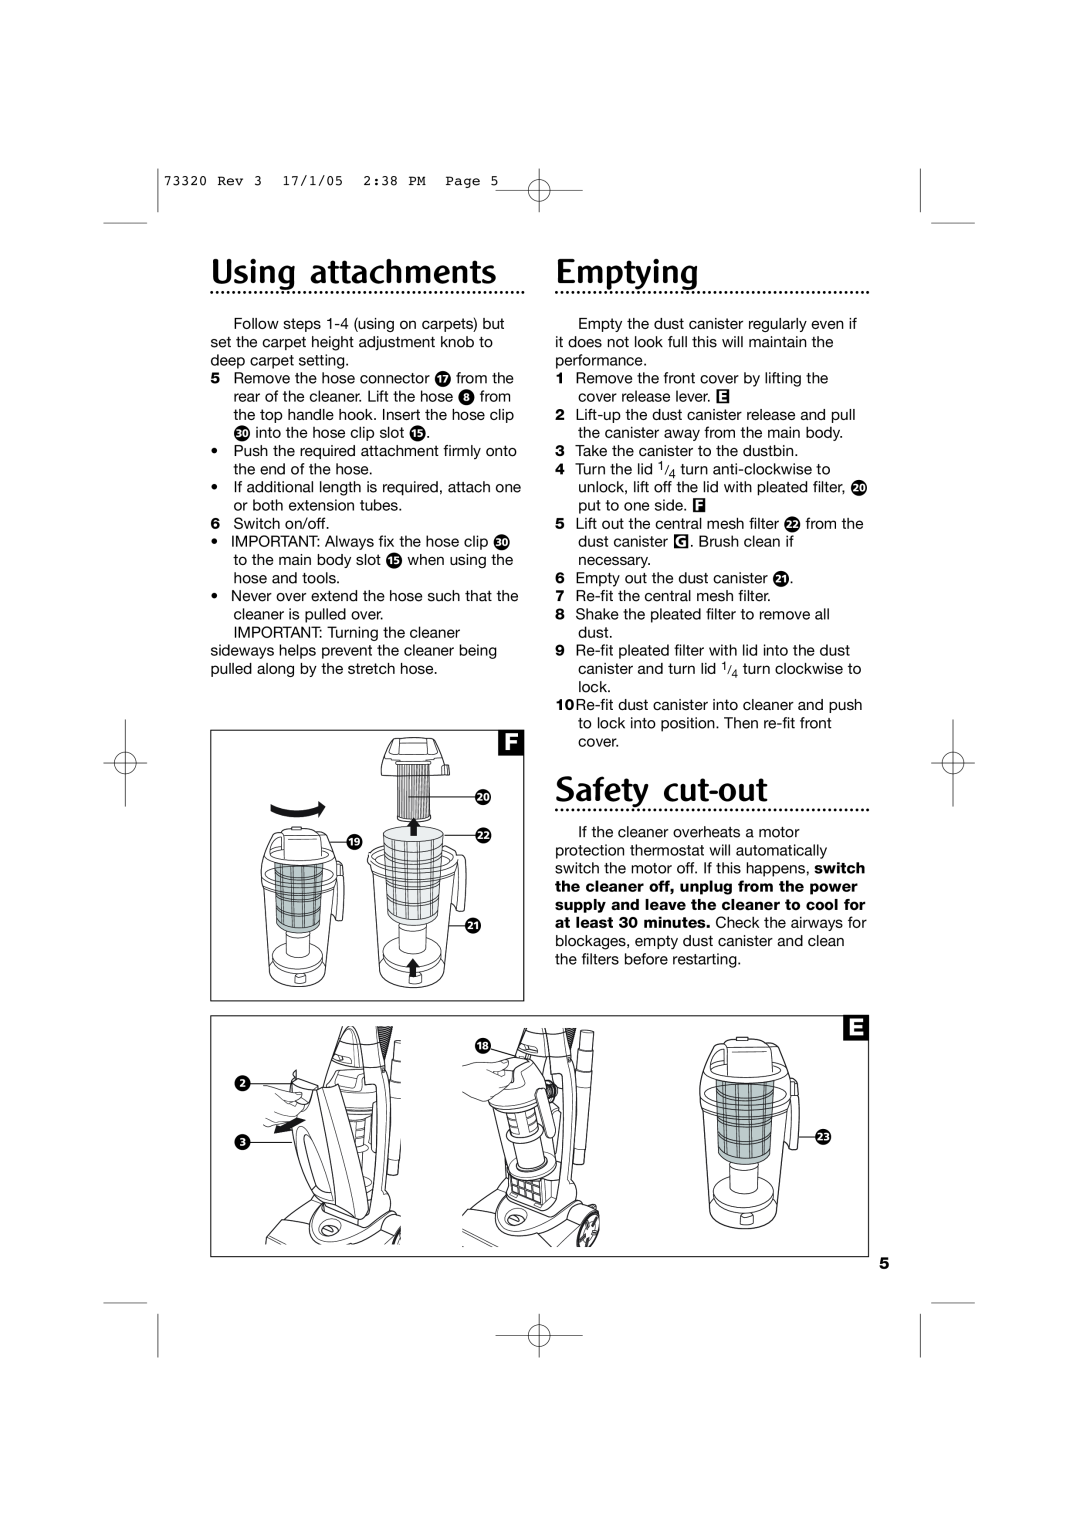 Morphy Richards Upright Bagless Vacuum Cleaner manual Using attachments, Emptying, Safety cut-out, Ì Ïô Ó 